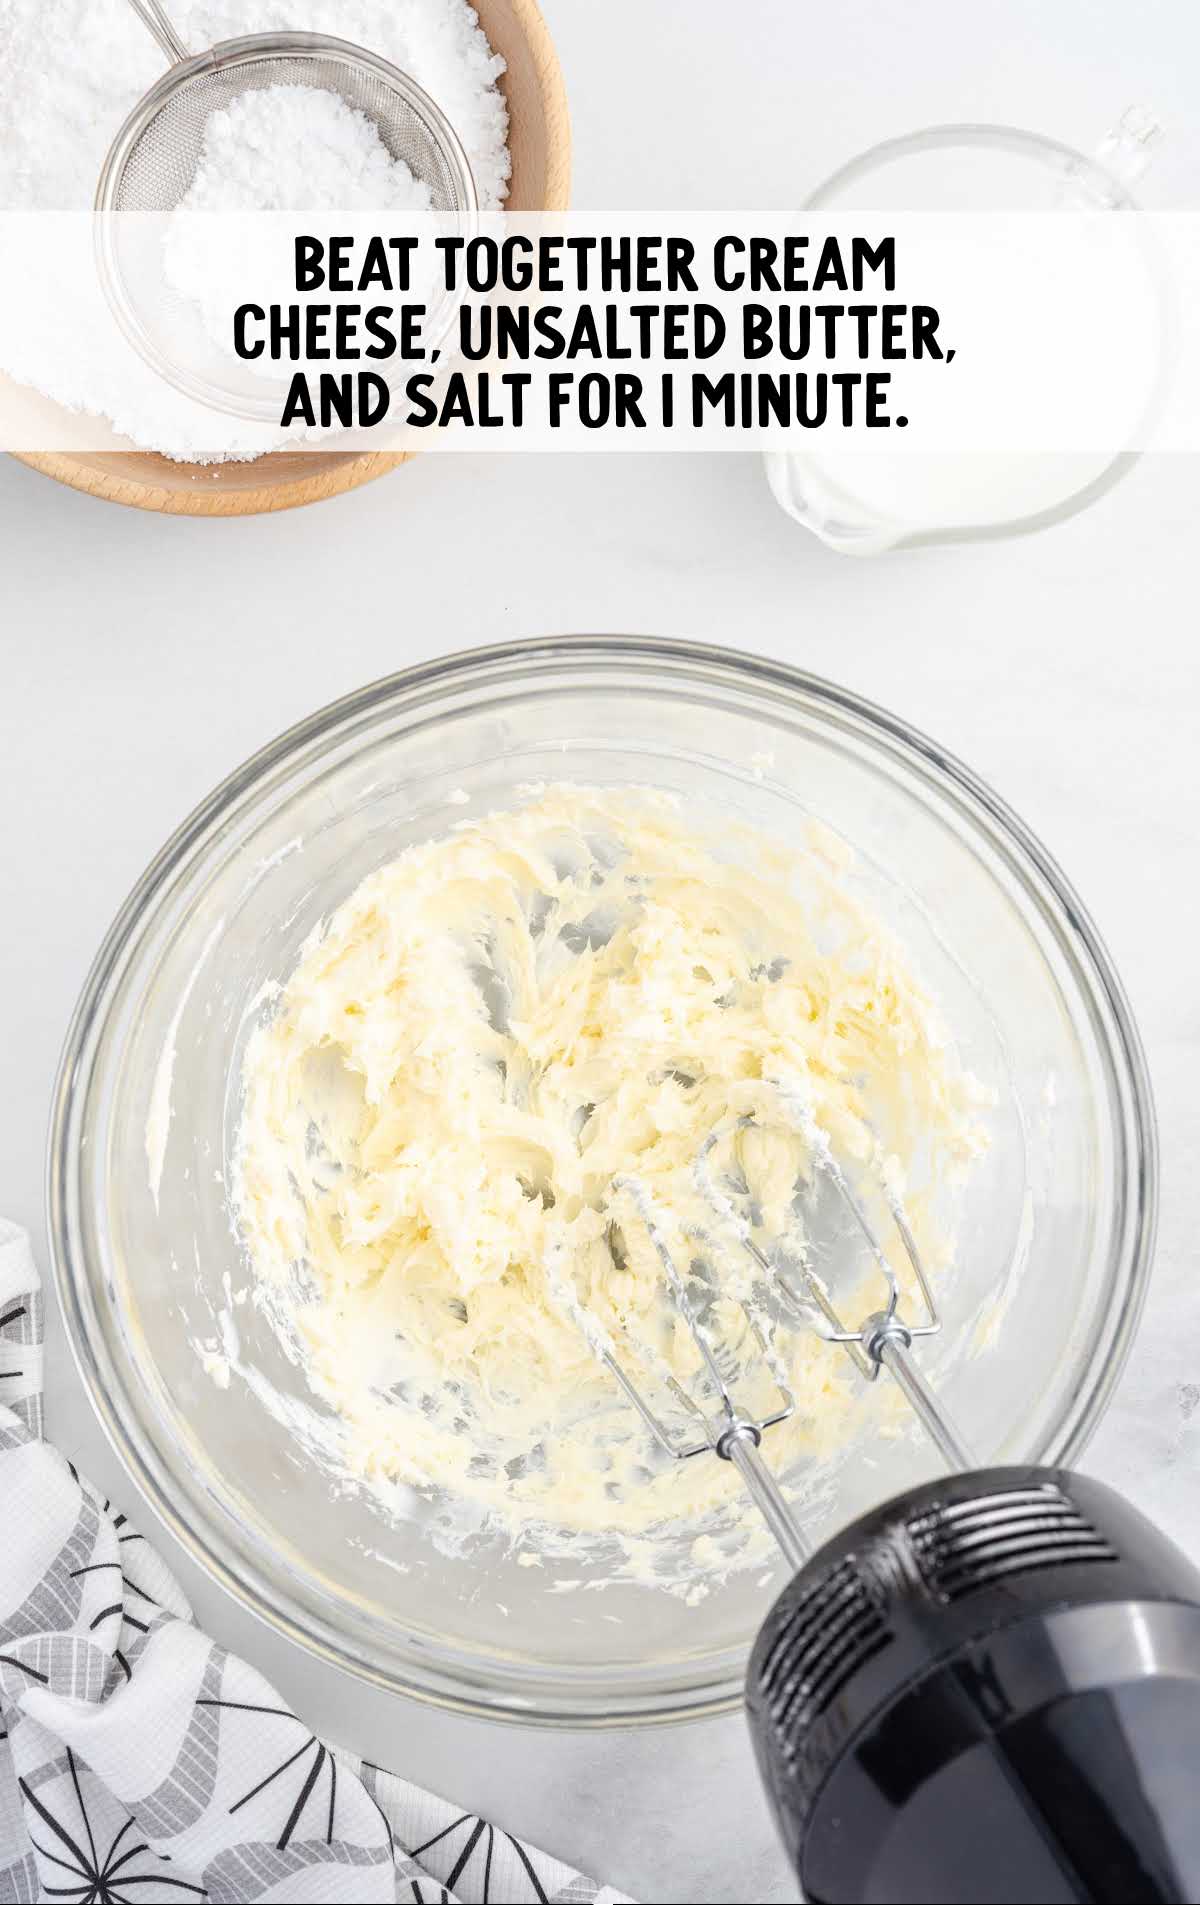 cream cheese, unsalted butter, and salt combined in a bowl